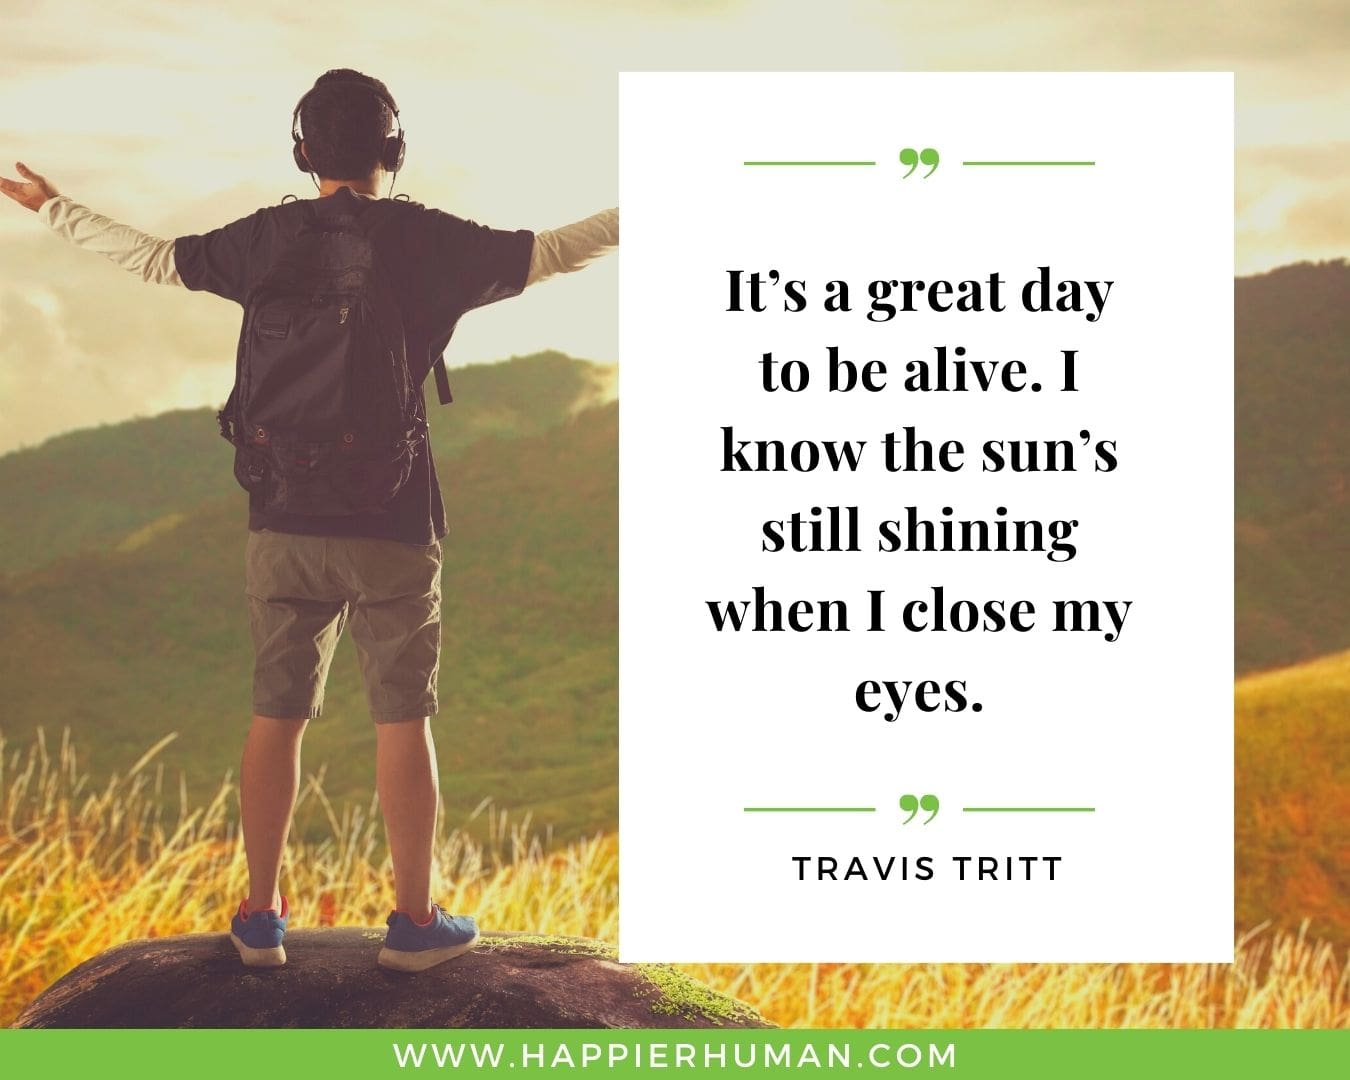 35 Inspirational Have a Great Day Quotes and Sayings - Happier Human